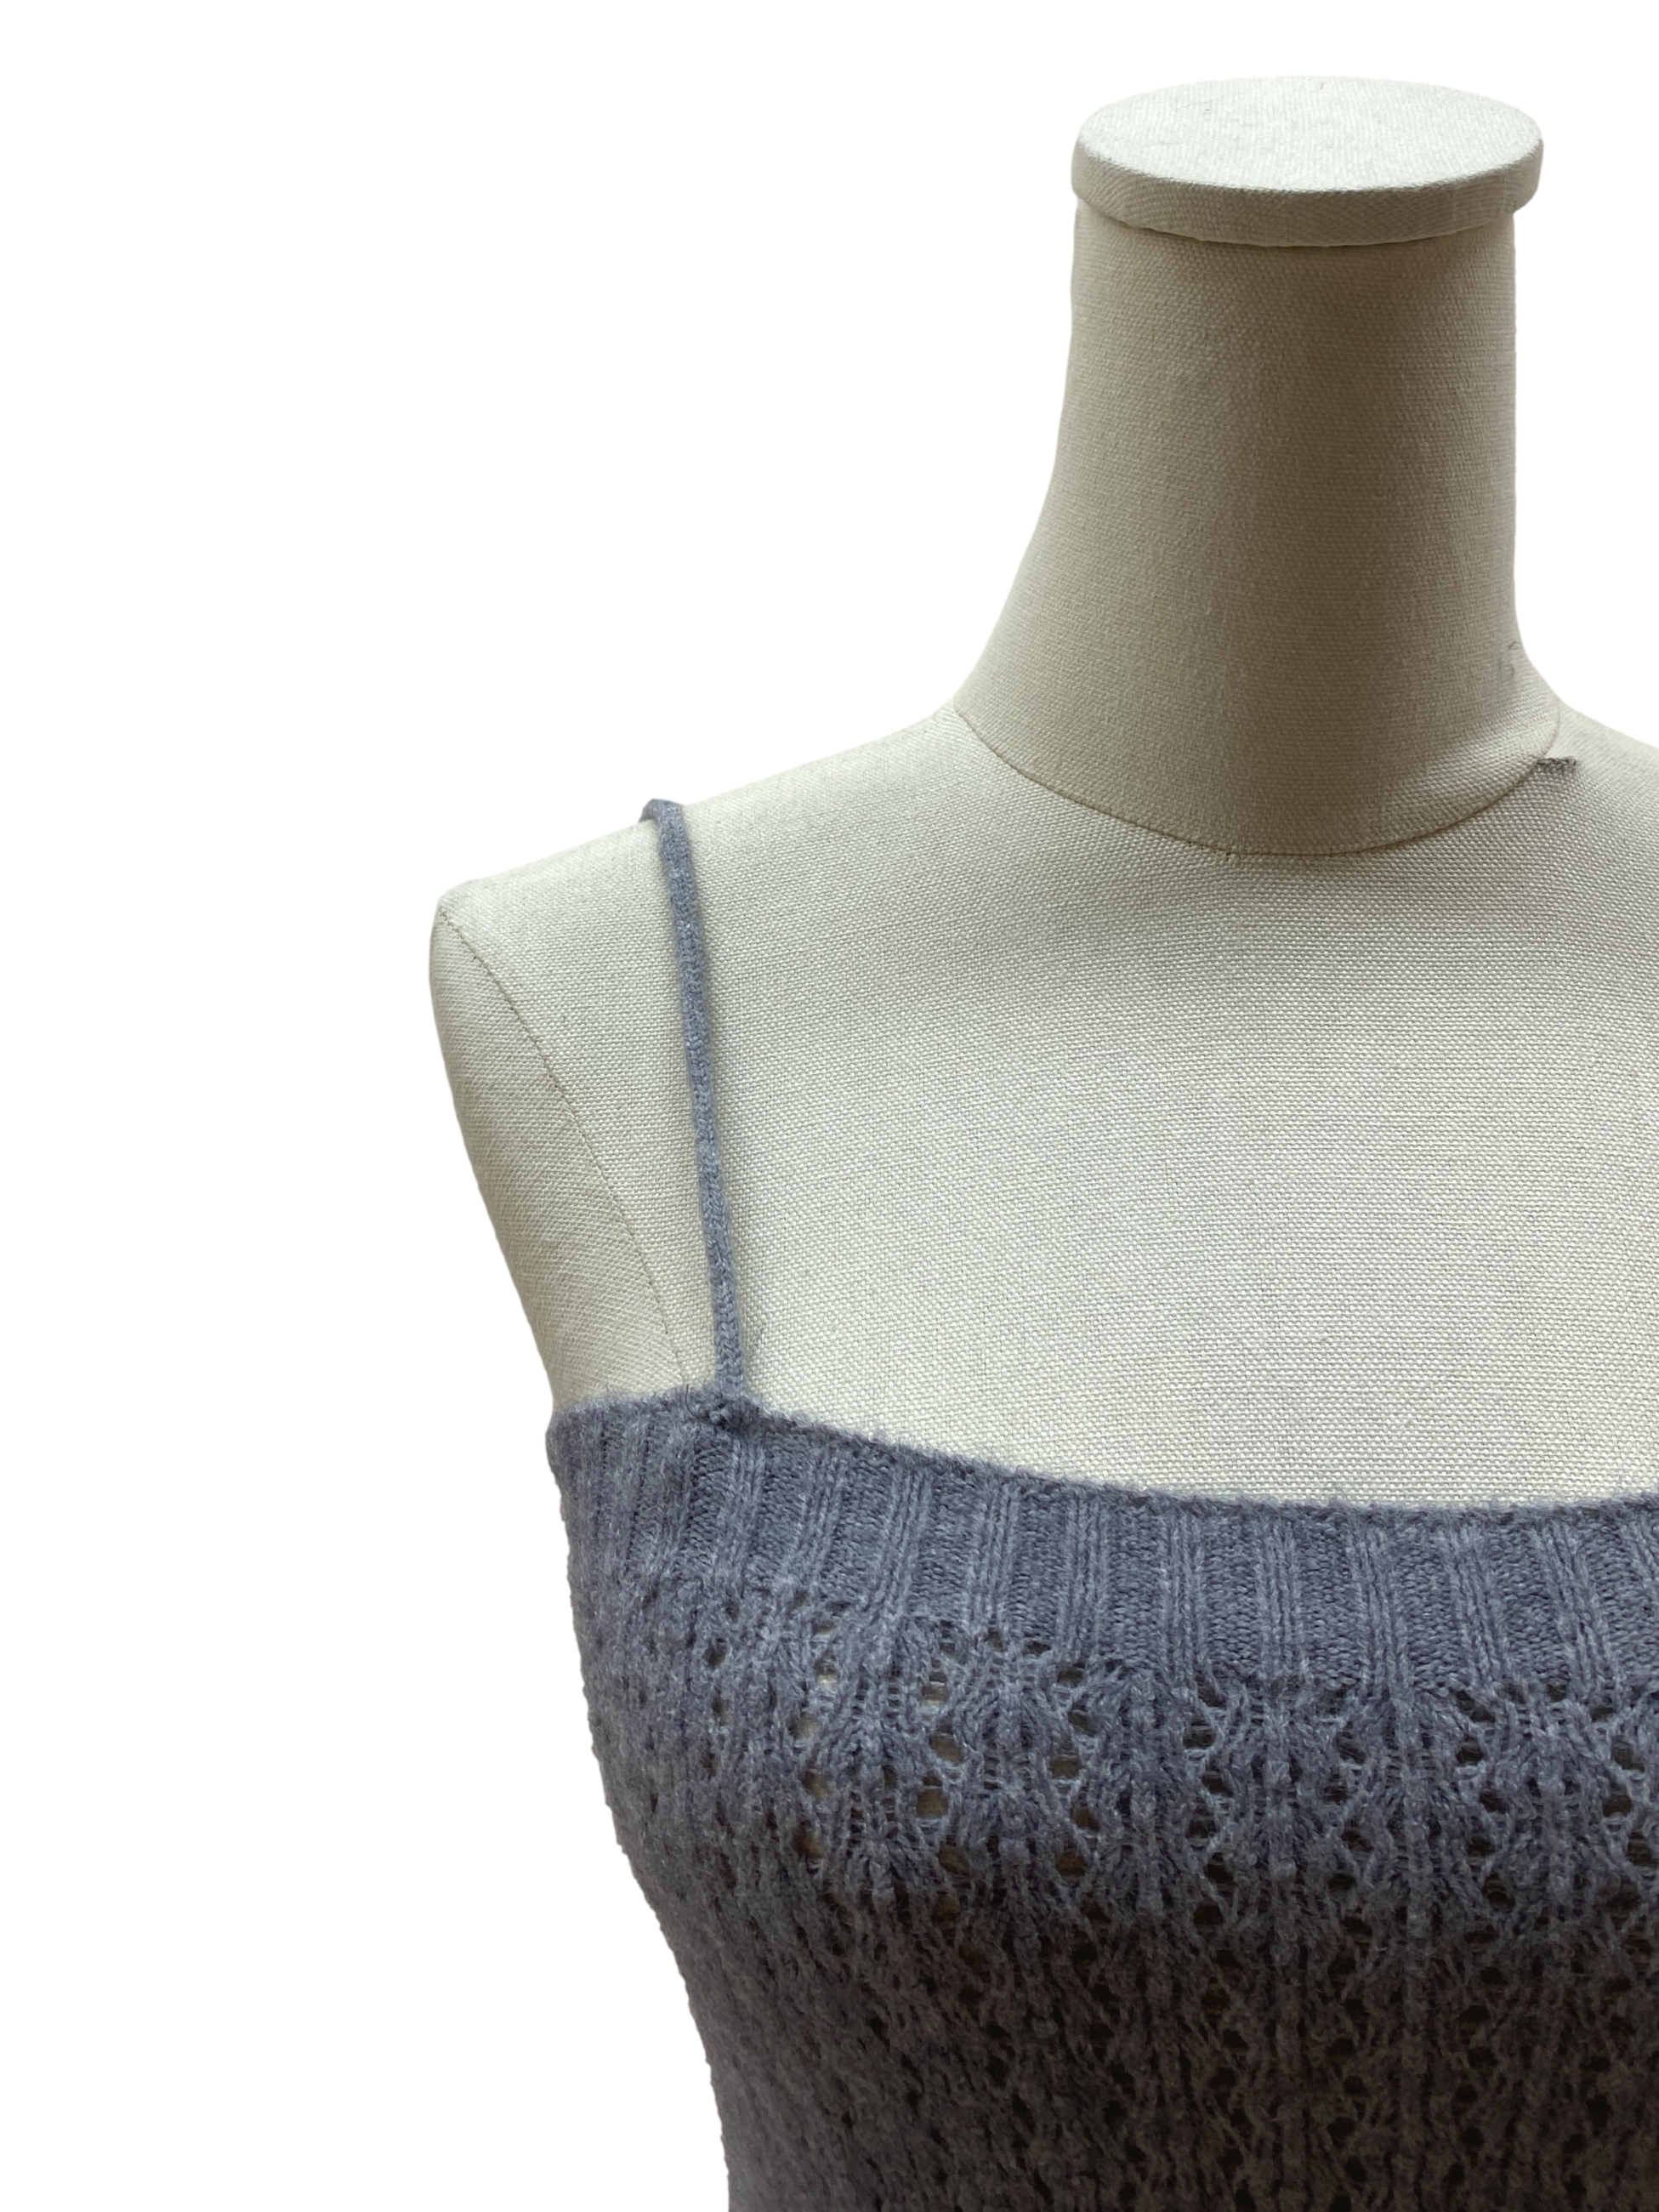 Fossil Grey Knitted Tank Top